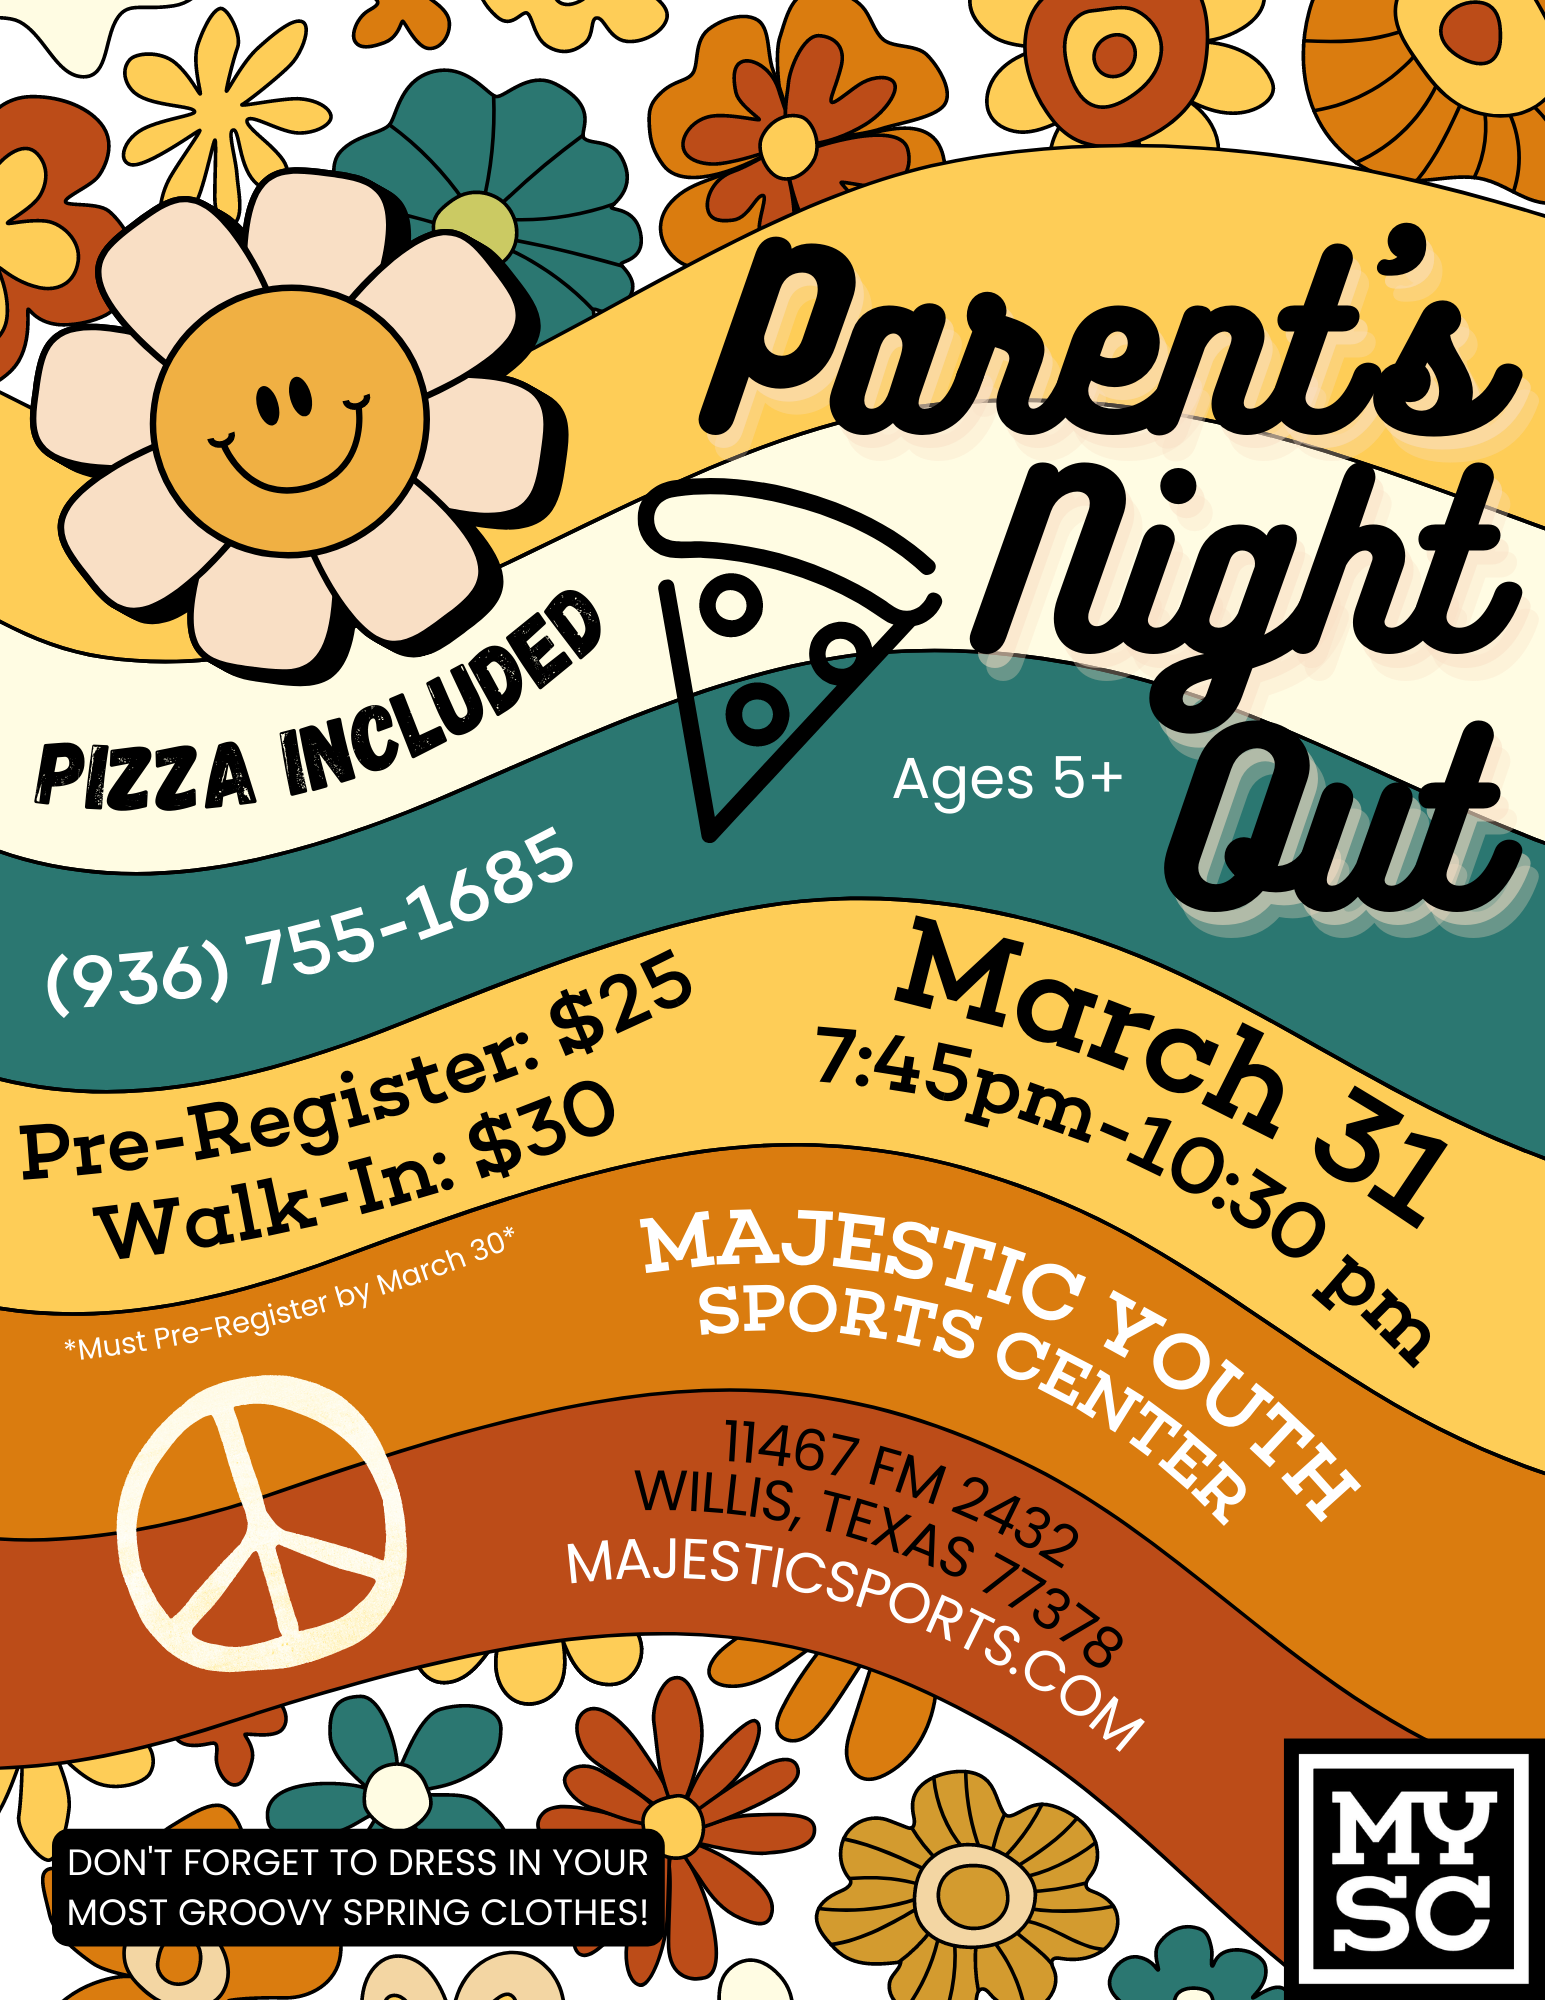 Are you looking for a night out on the town, but need a reliable and fun place for your children to stay? Look no further than the Majestic Youth Sports Center Parents Night Out event on March 31st!